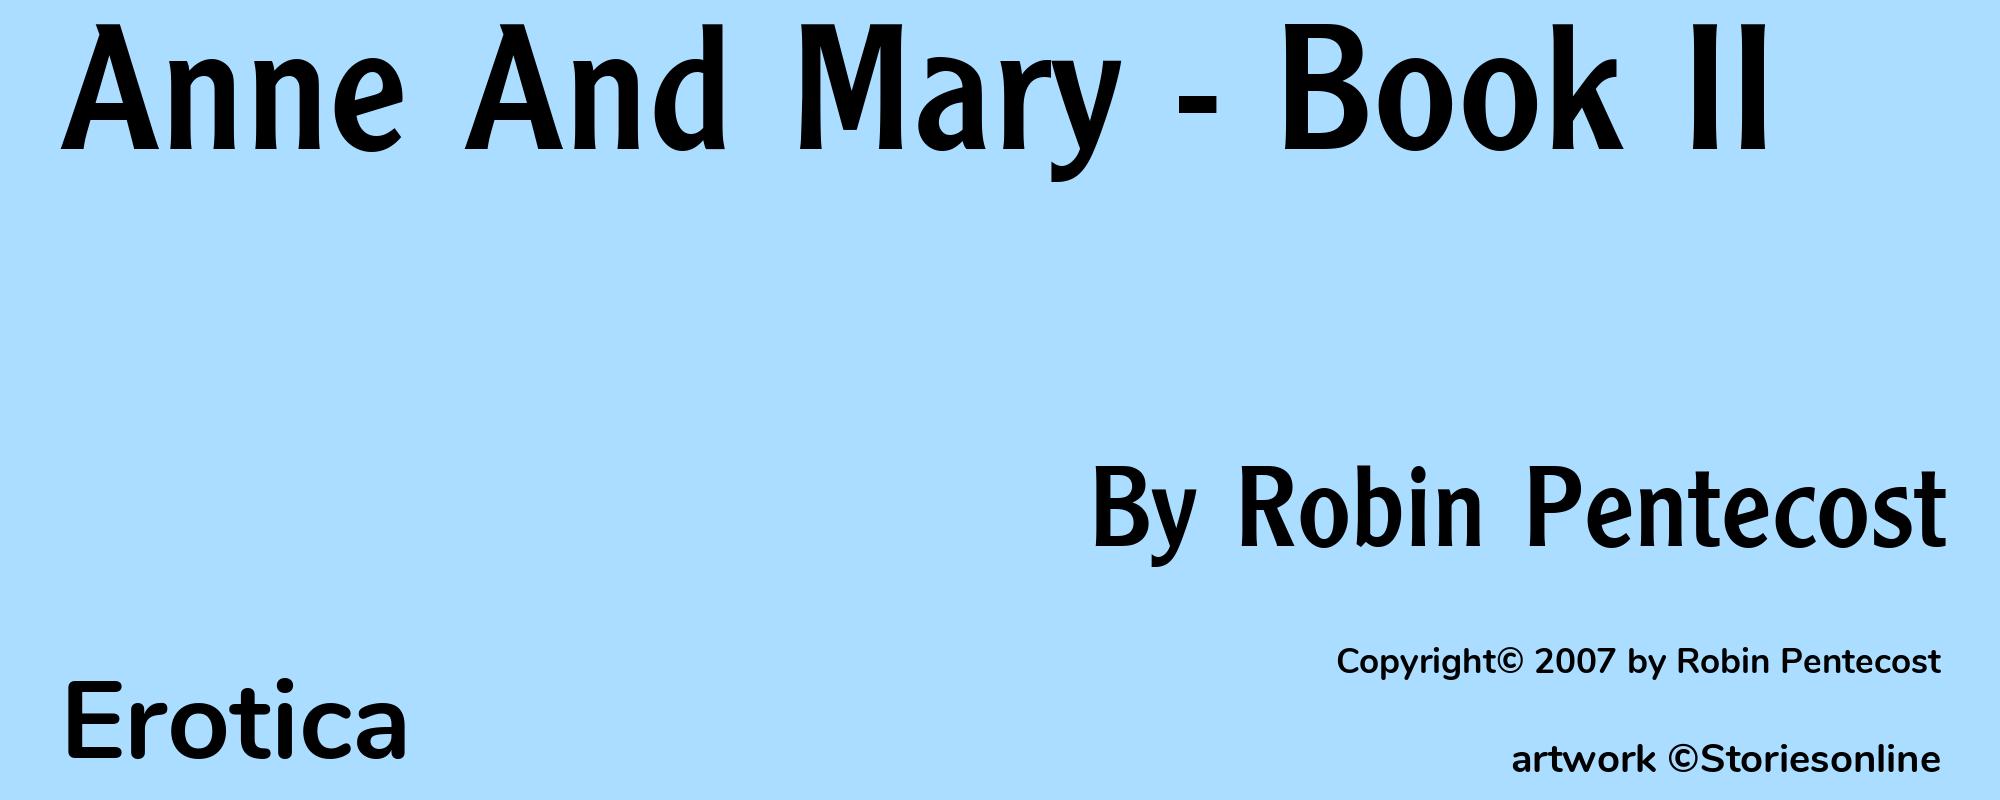 Anne And Mary - Book II - Cover